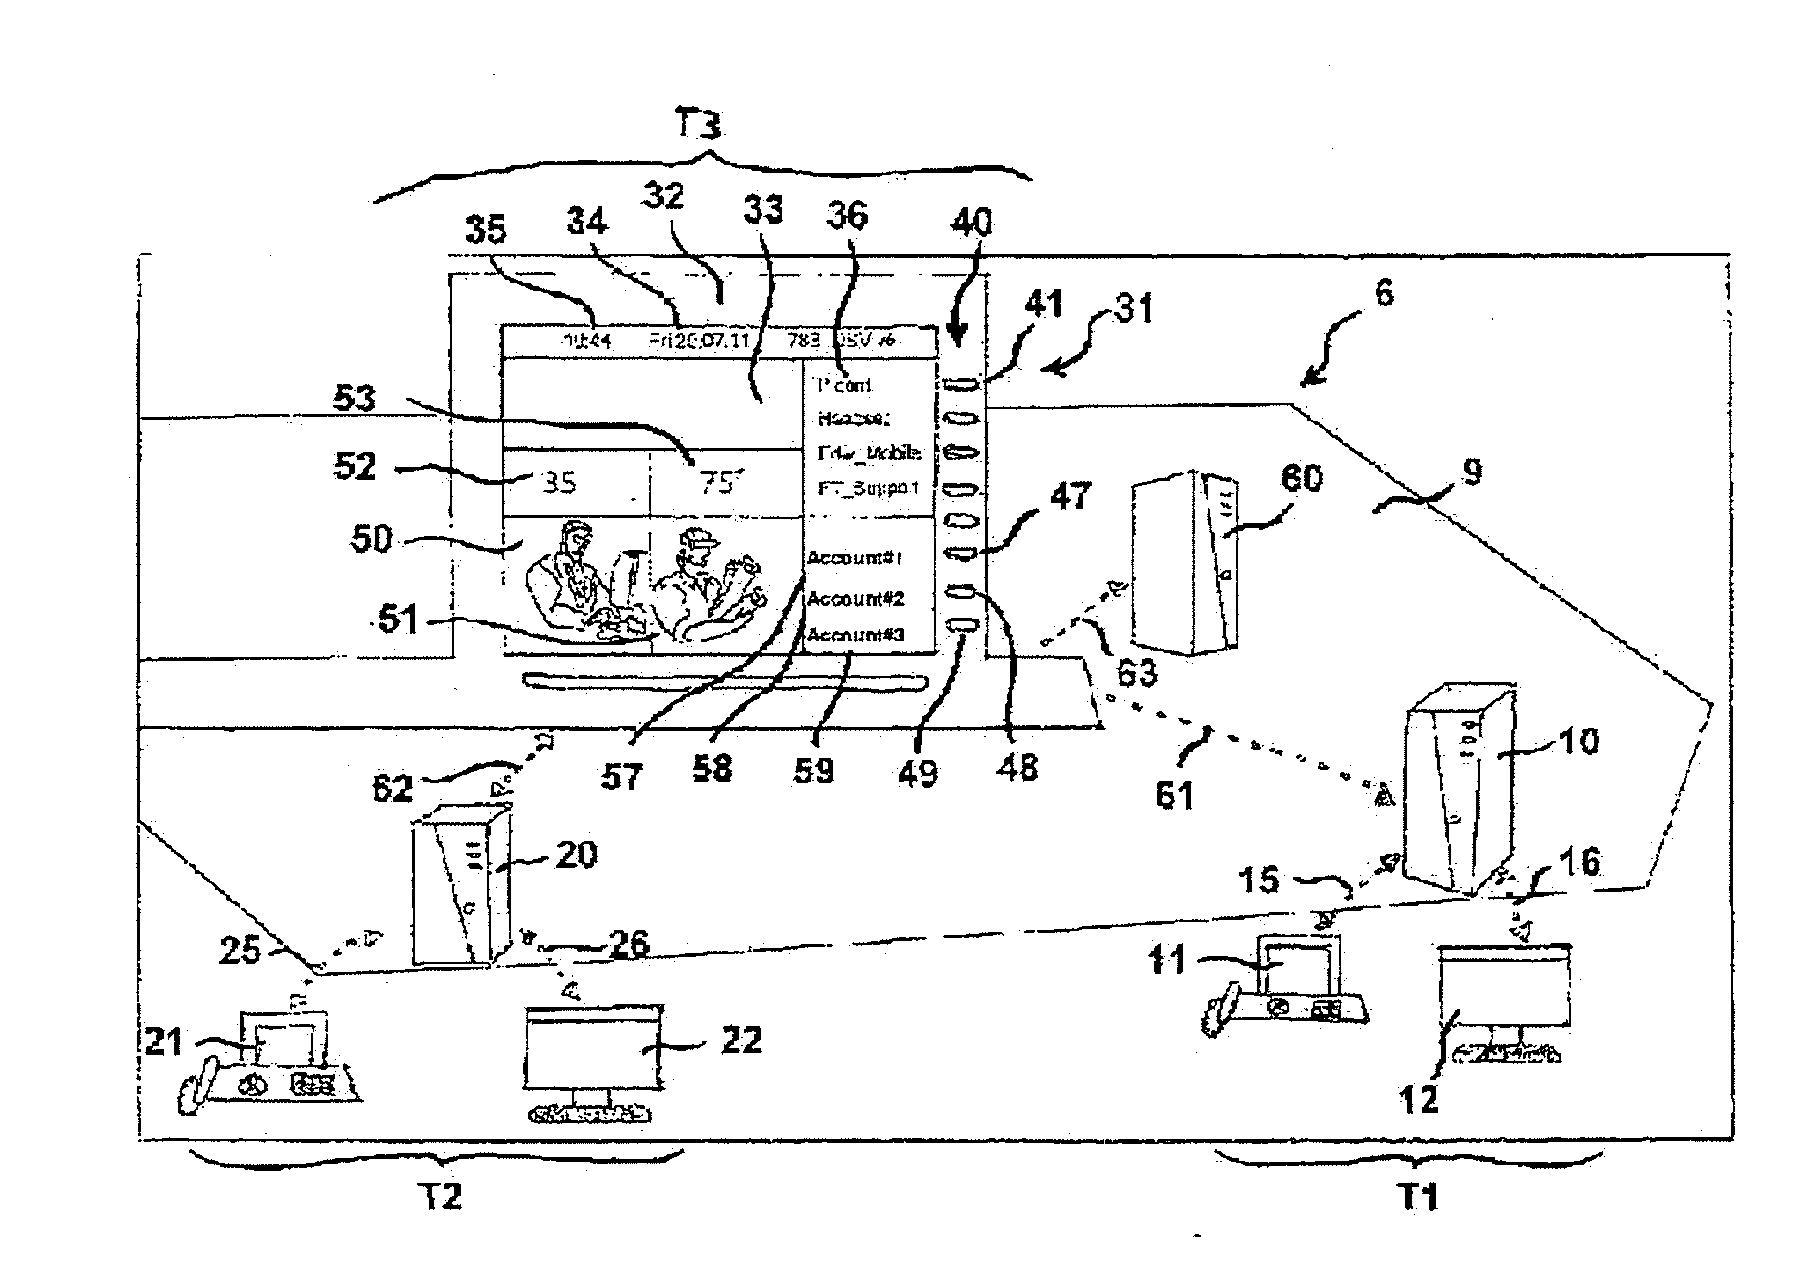 Method and apparatus for providing data produced in a conference